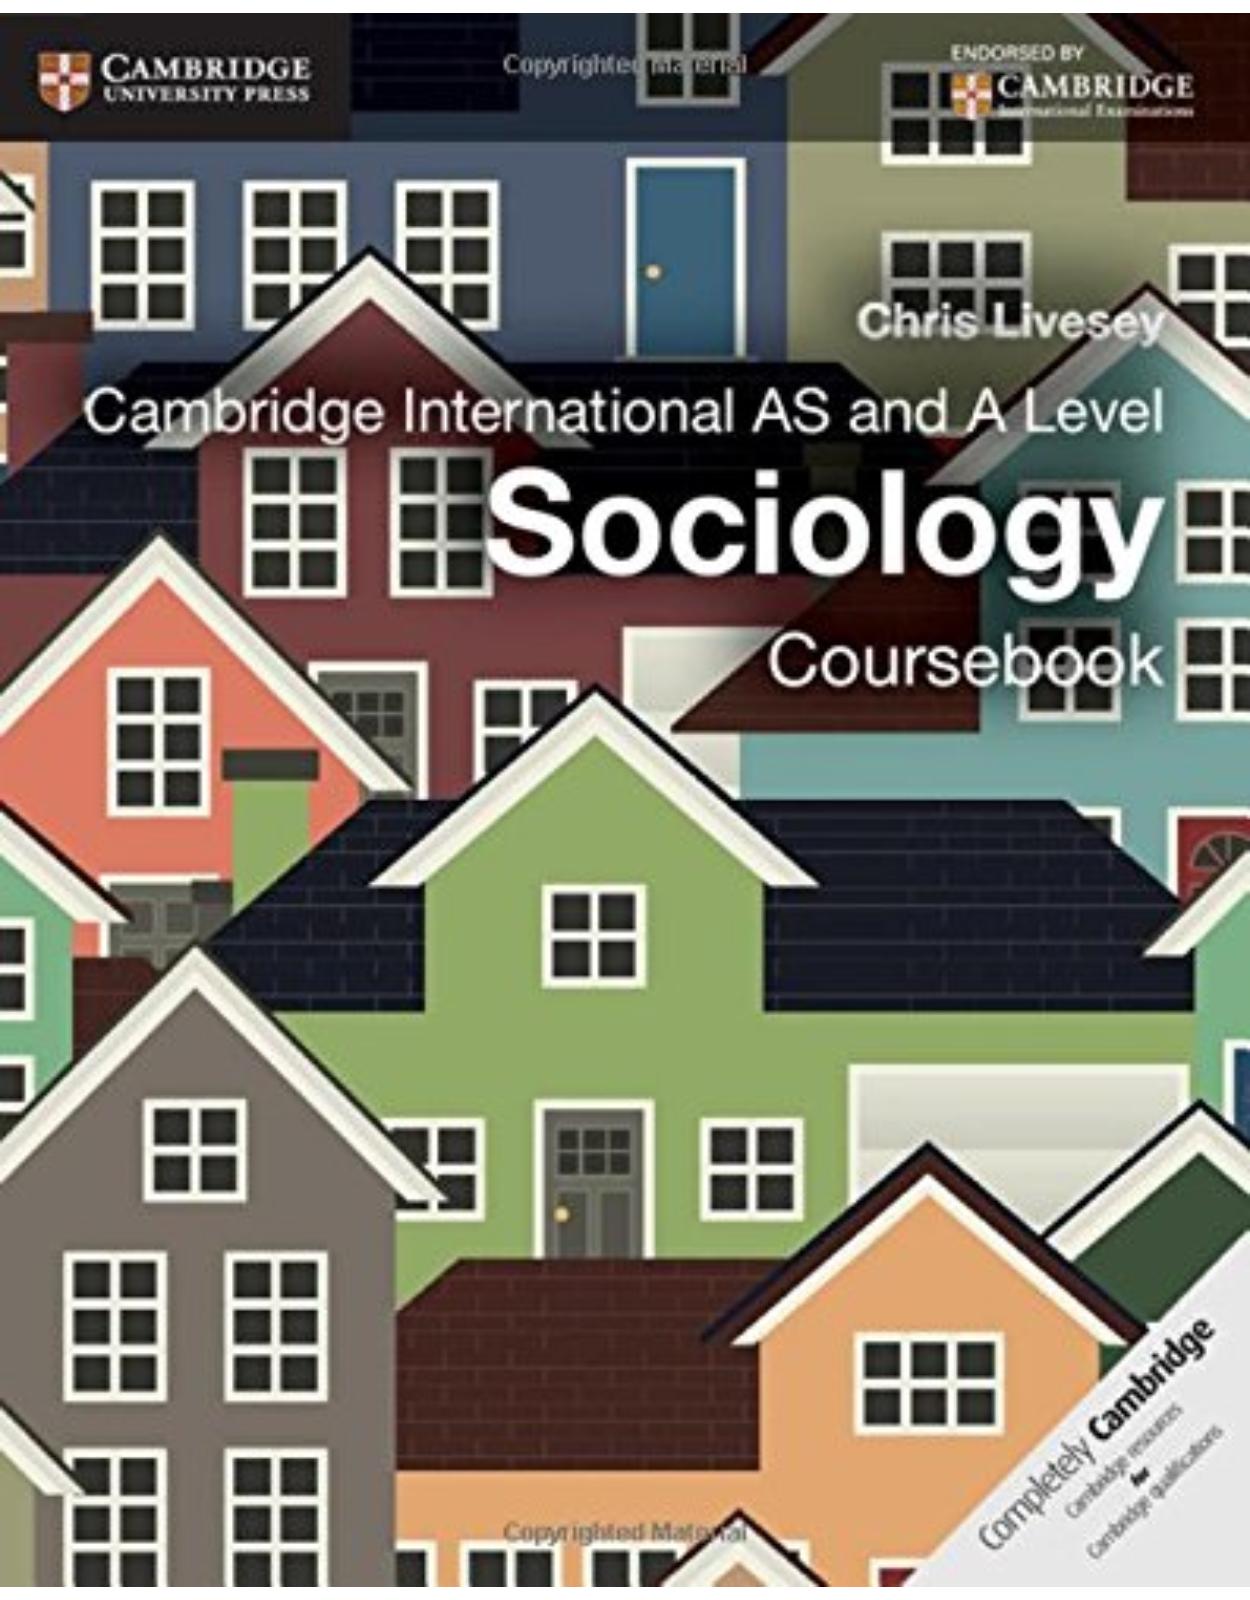 Cambridge International AS and A Level Sociology Coursebook (Cambridge International Examinations)